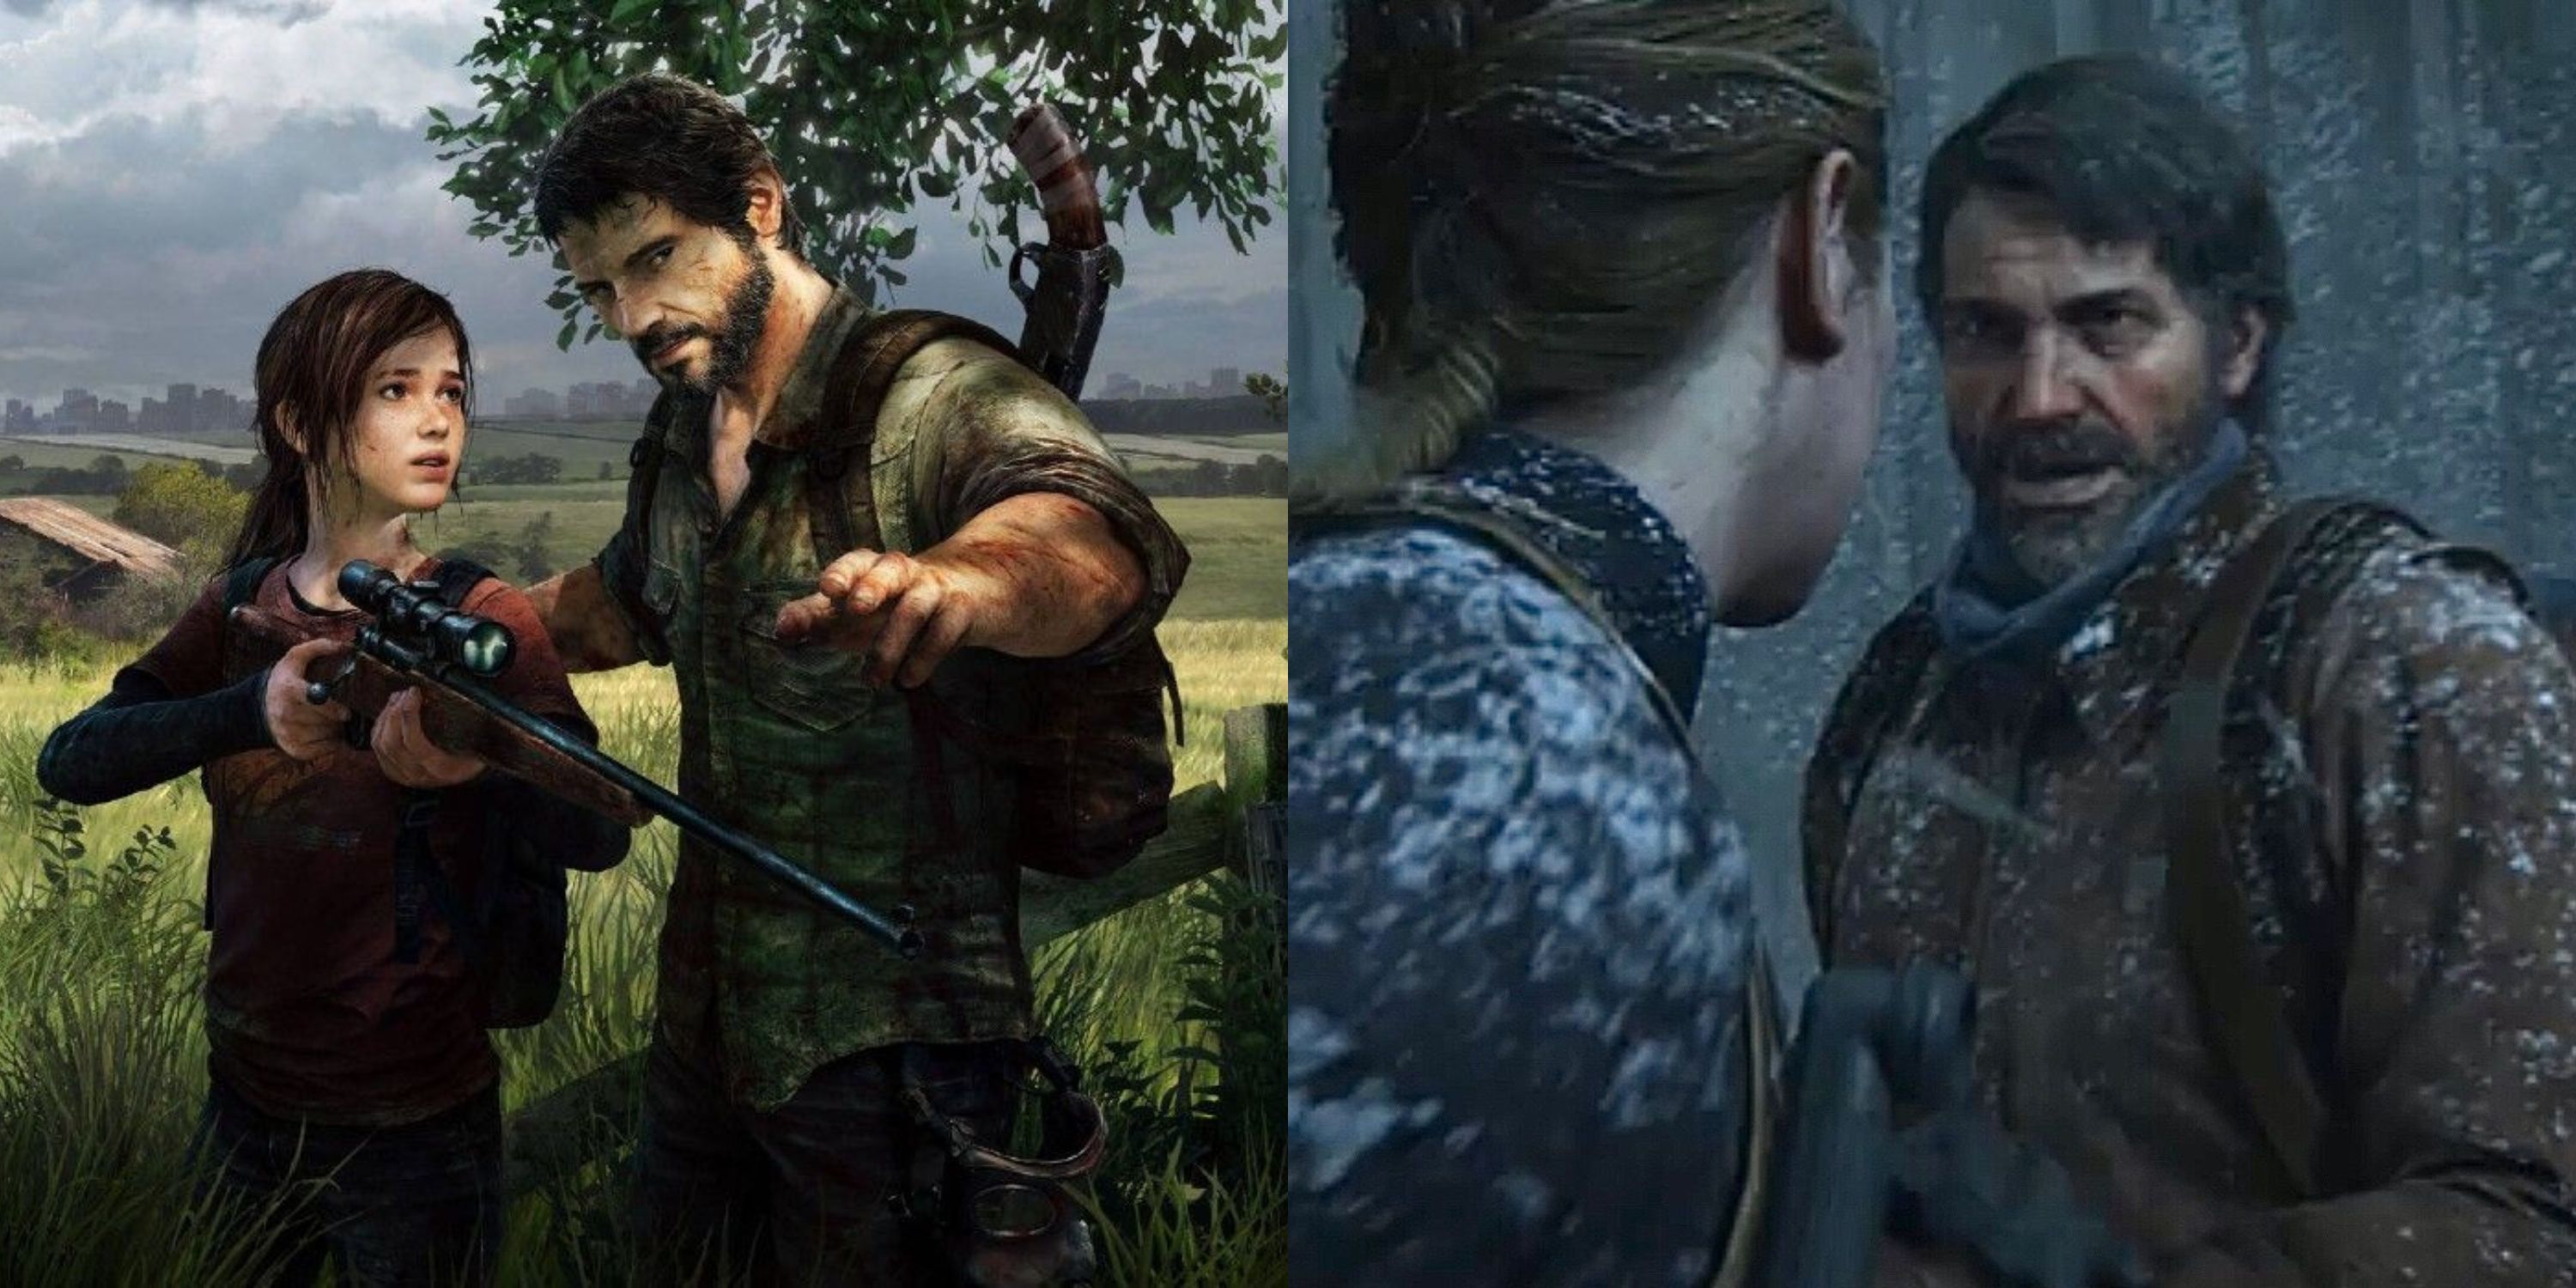 Worlds of Gaming: Surviving the Last of Us - Story of Joel Miller